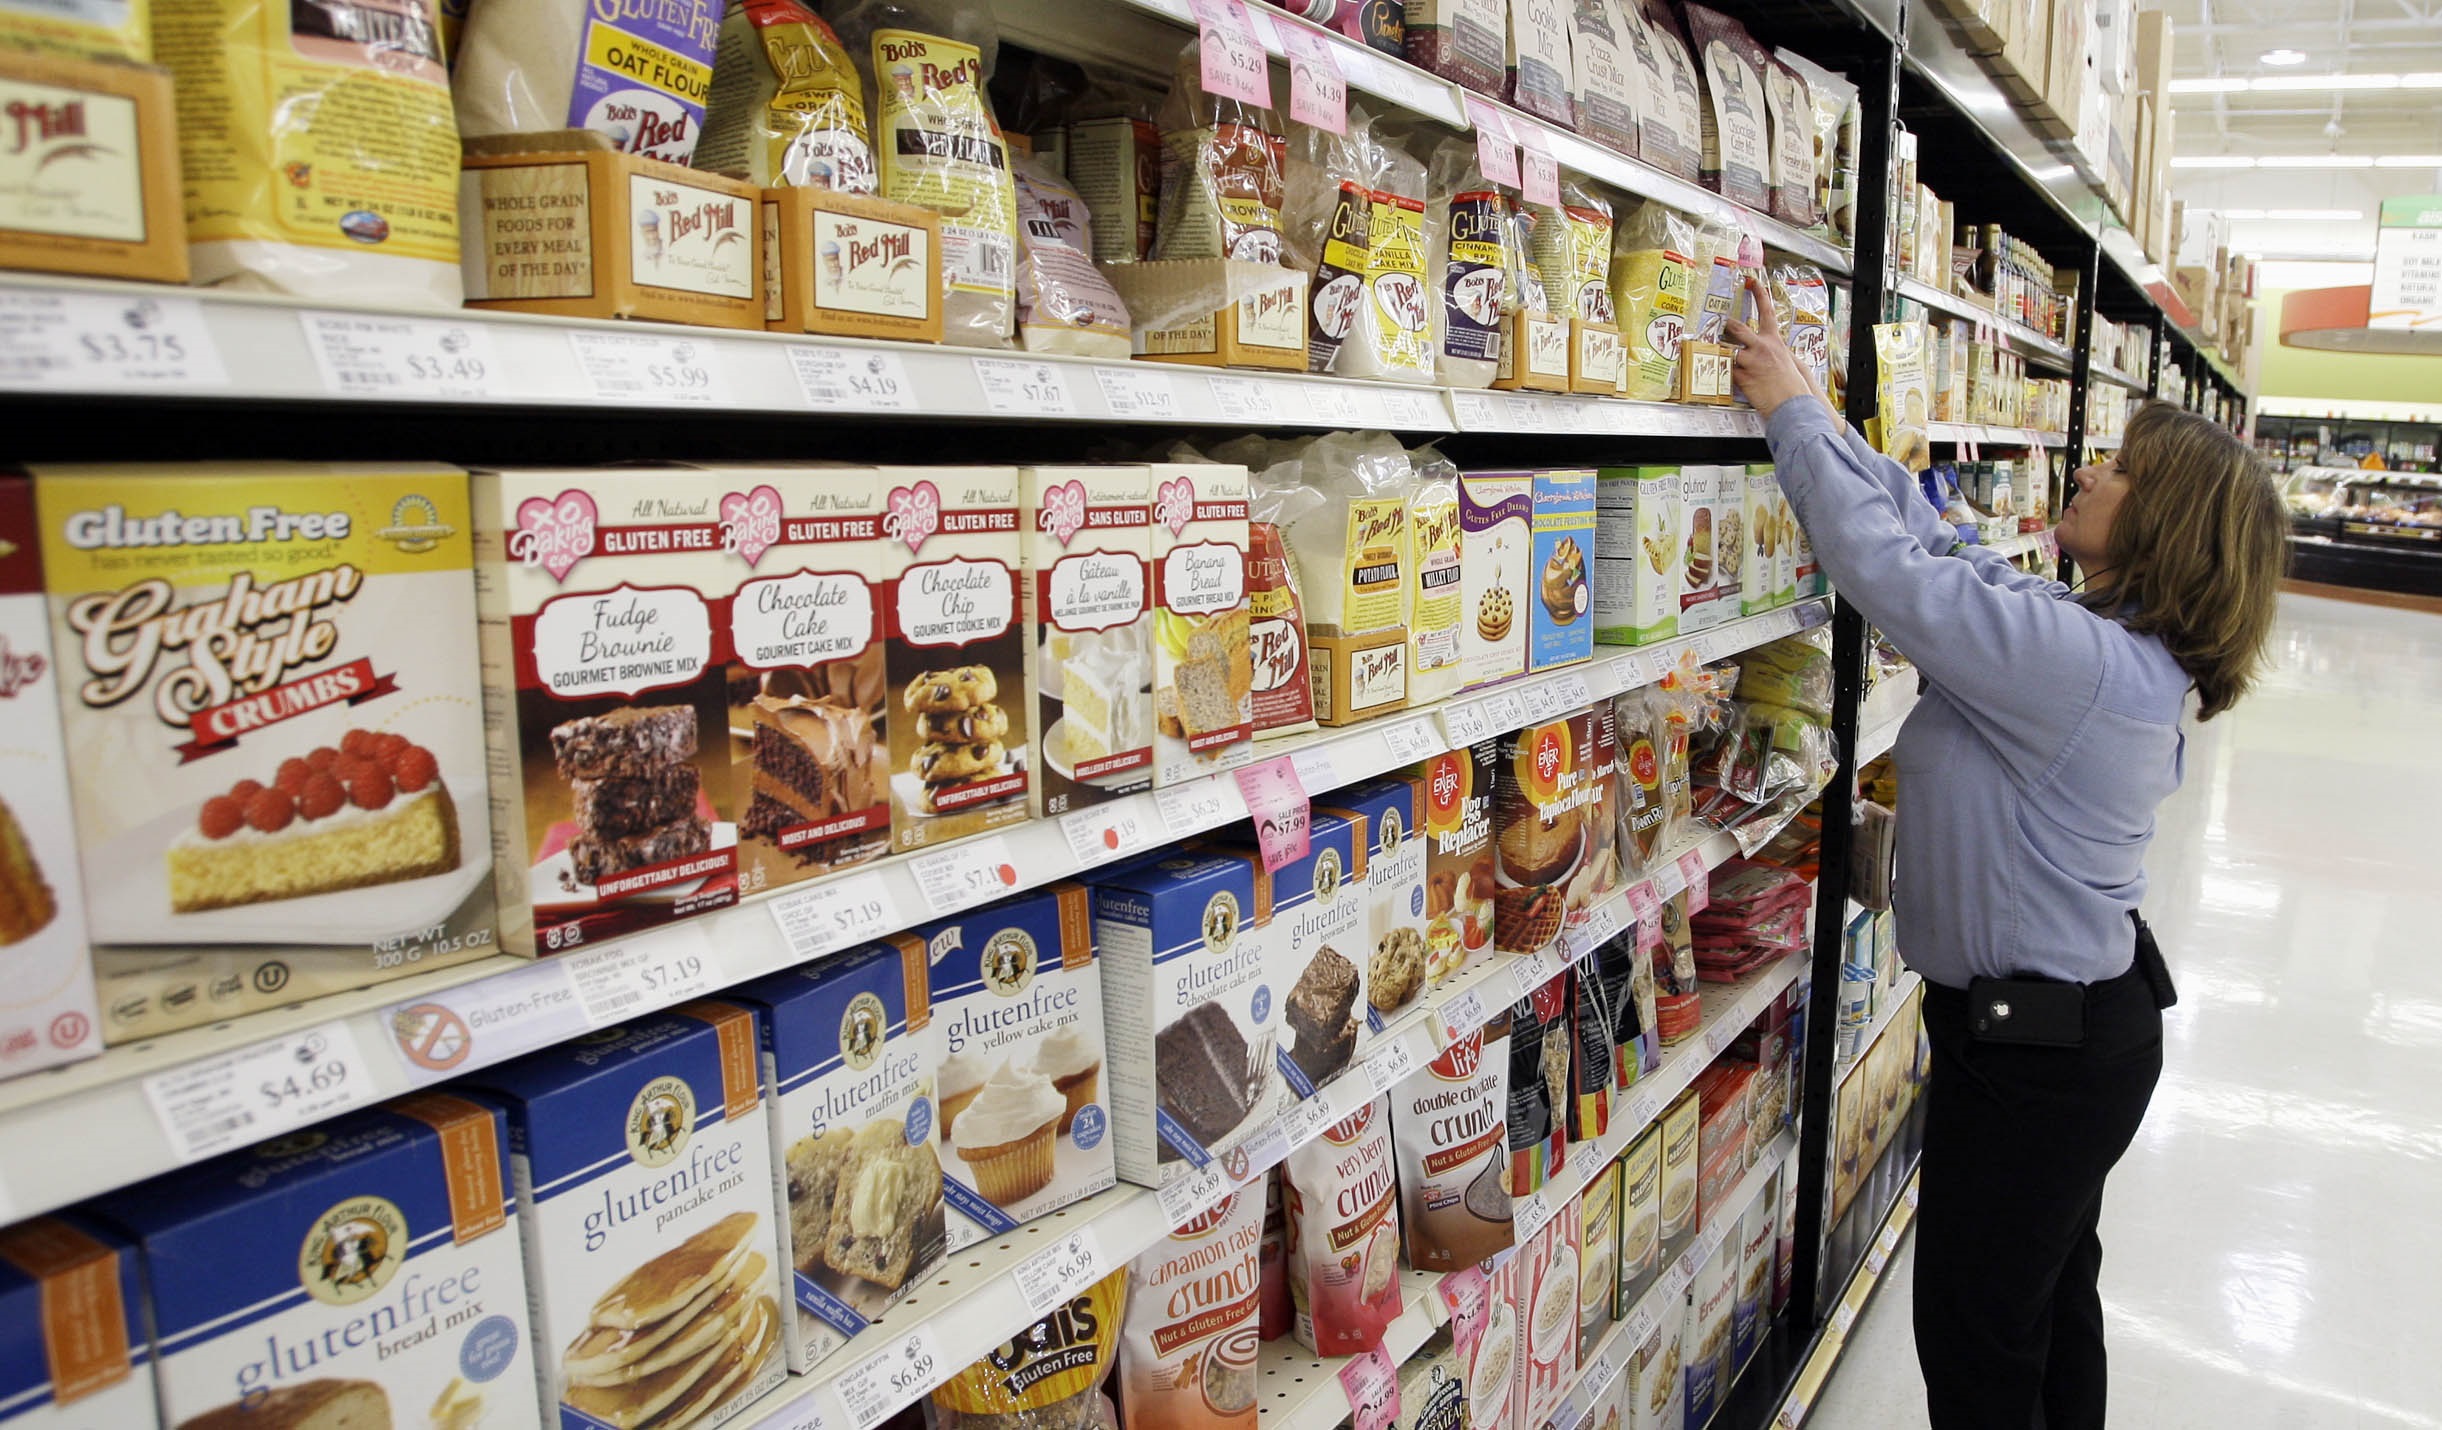 In this Saturday Nov. 23, 2013 photo, Laura Hoffmann, shift manager at Festival Foods in Sheboygan, Wis., makes sure the gluten free products are in their proper spot on the shelves. (Gary C. Klein — AP)